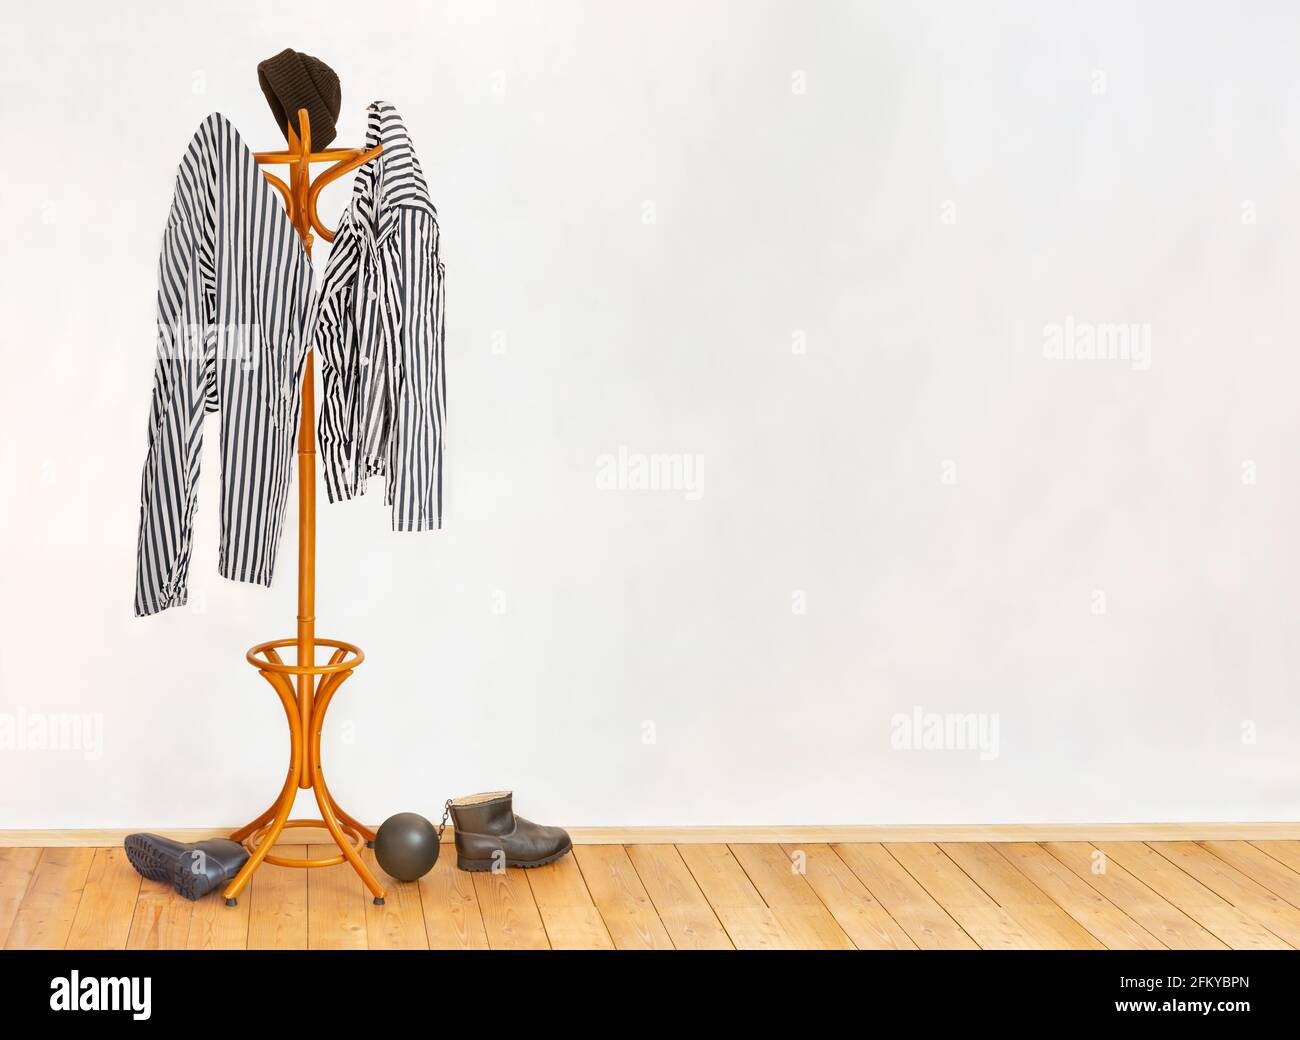 The striped prisoners costume hangs on the coat hook in an empty cell with wooden floor. Stock Photo